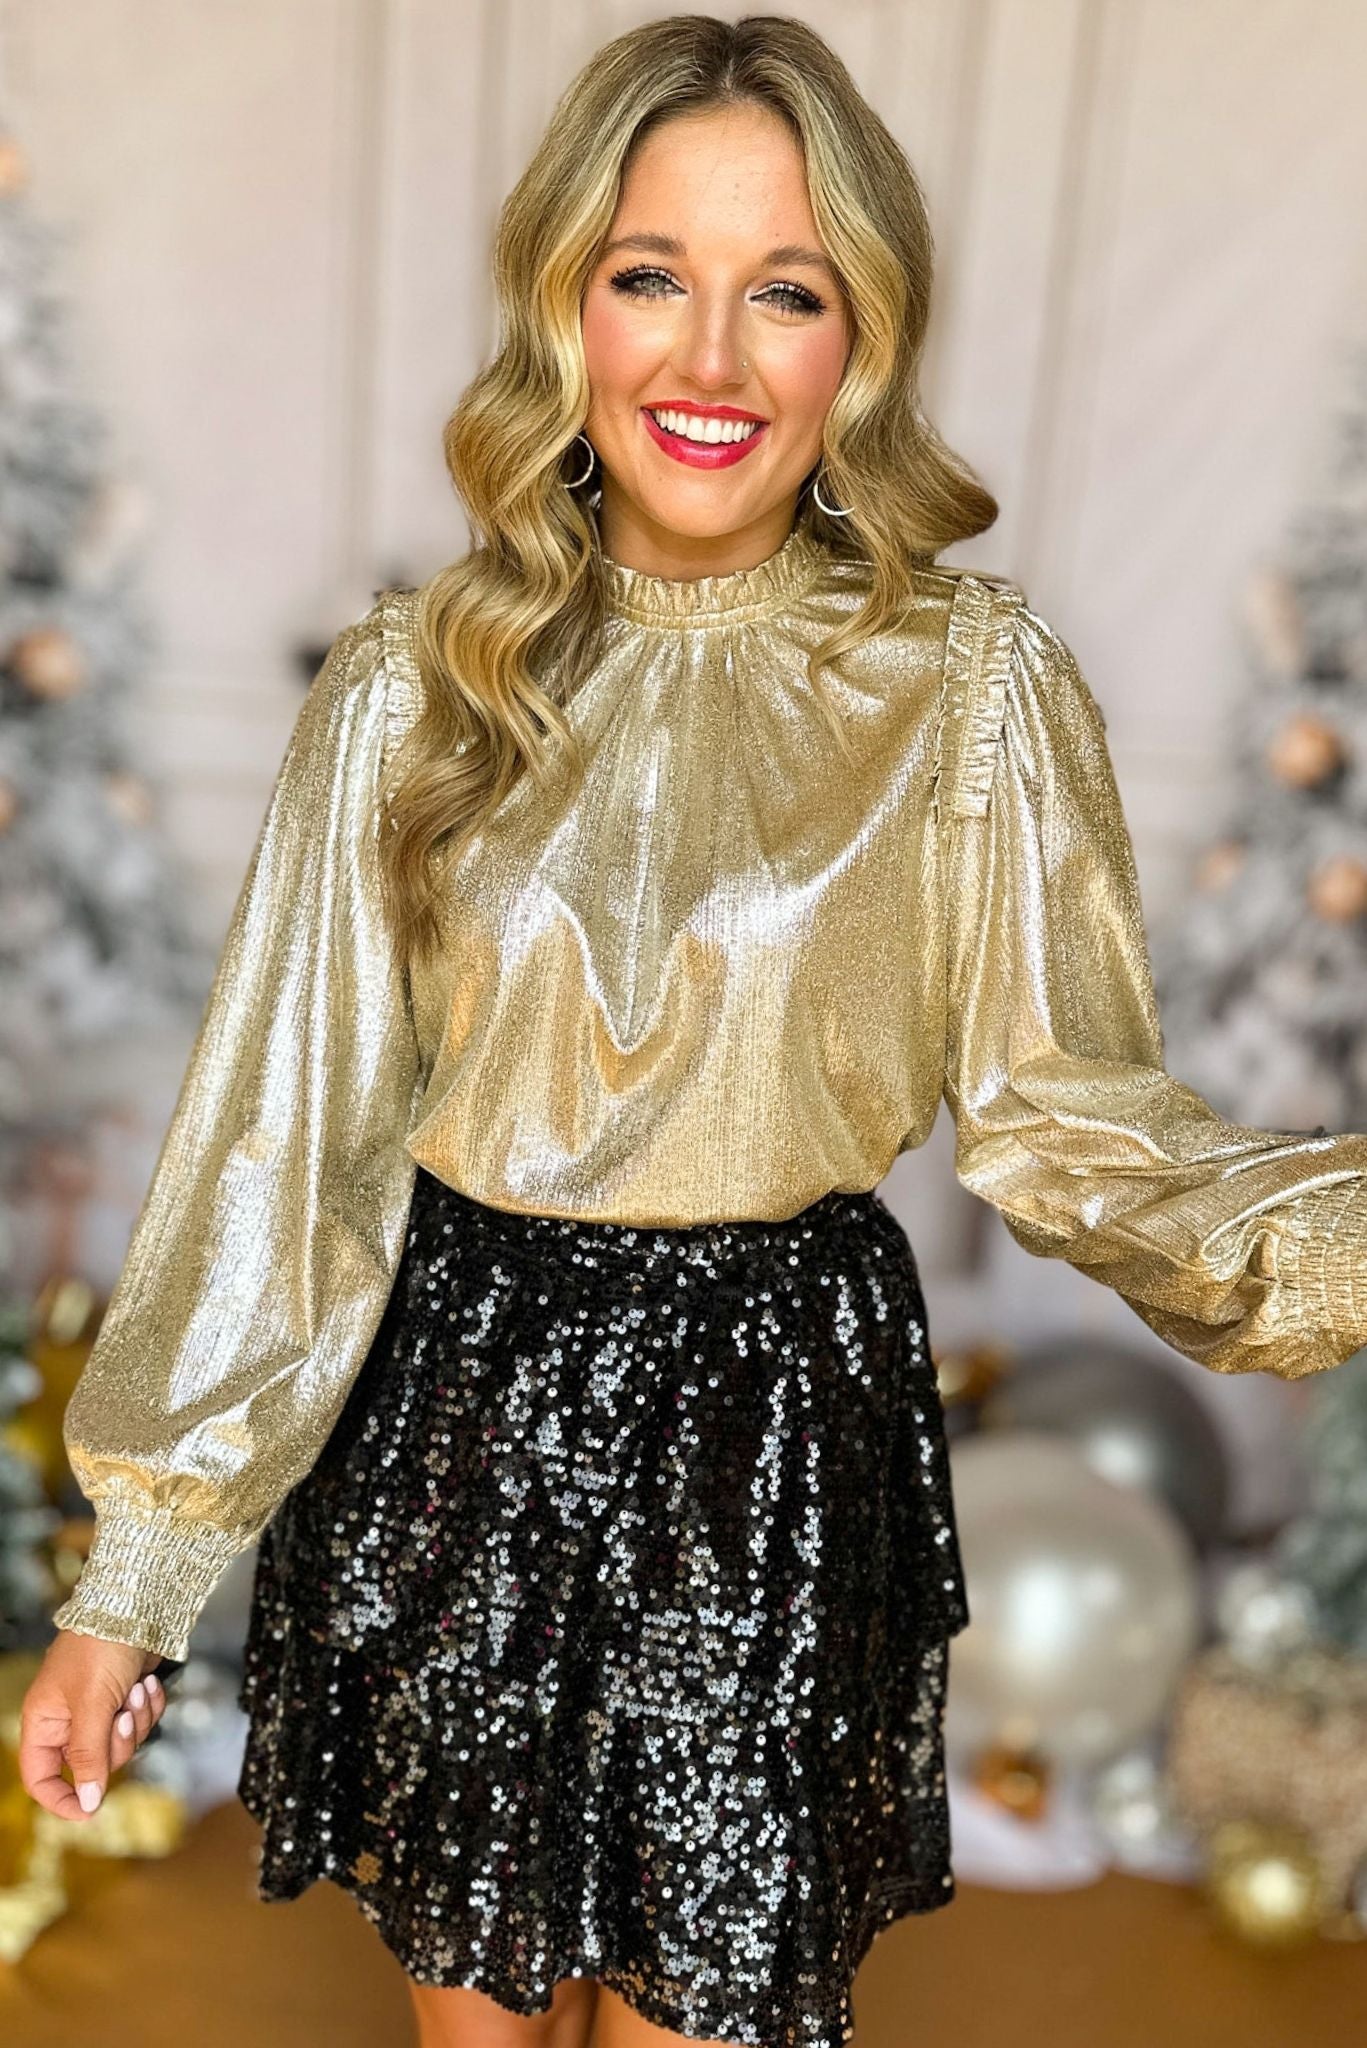  SSYS The Noelle Top In Champagne, must have top, must have style, must have holiday, holiday collection, holiday fashion, elevated style, elevated top, mom style, holiday style, shop style your senses by mallory fitzsimmons